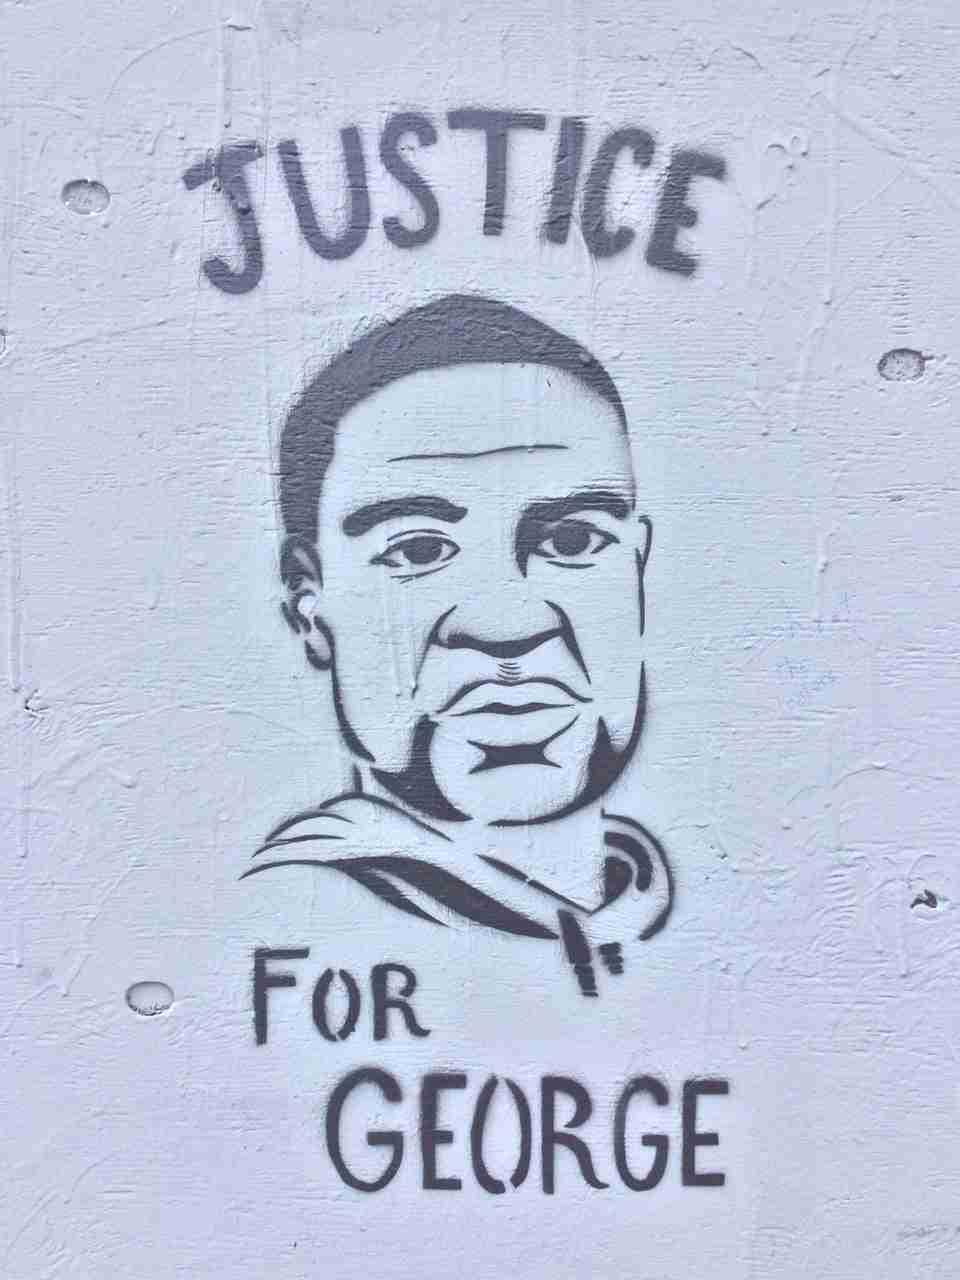 Stencil street art of George Floyd on a gray wall with the word JUSTICE above his head, and FOR GEORGE below. Two of the dried drippings of gray paint appear as if they are tears coming from his right eye.